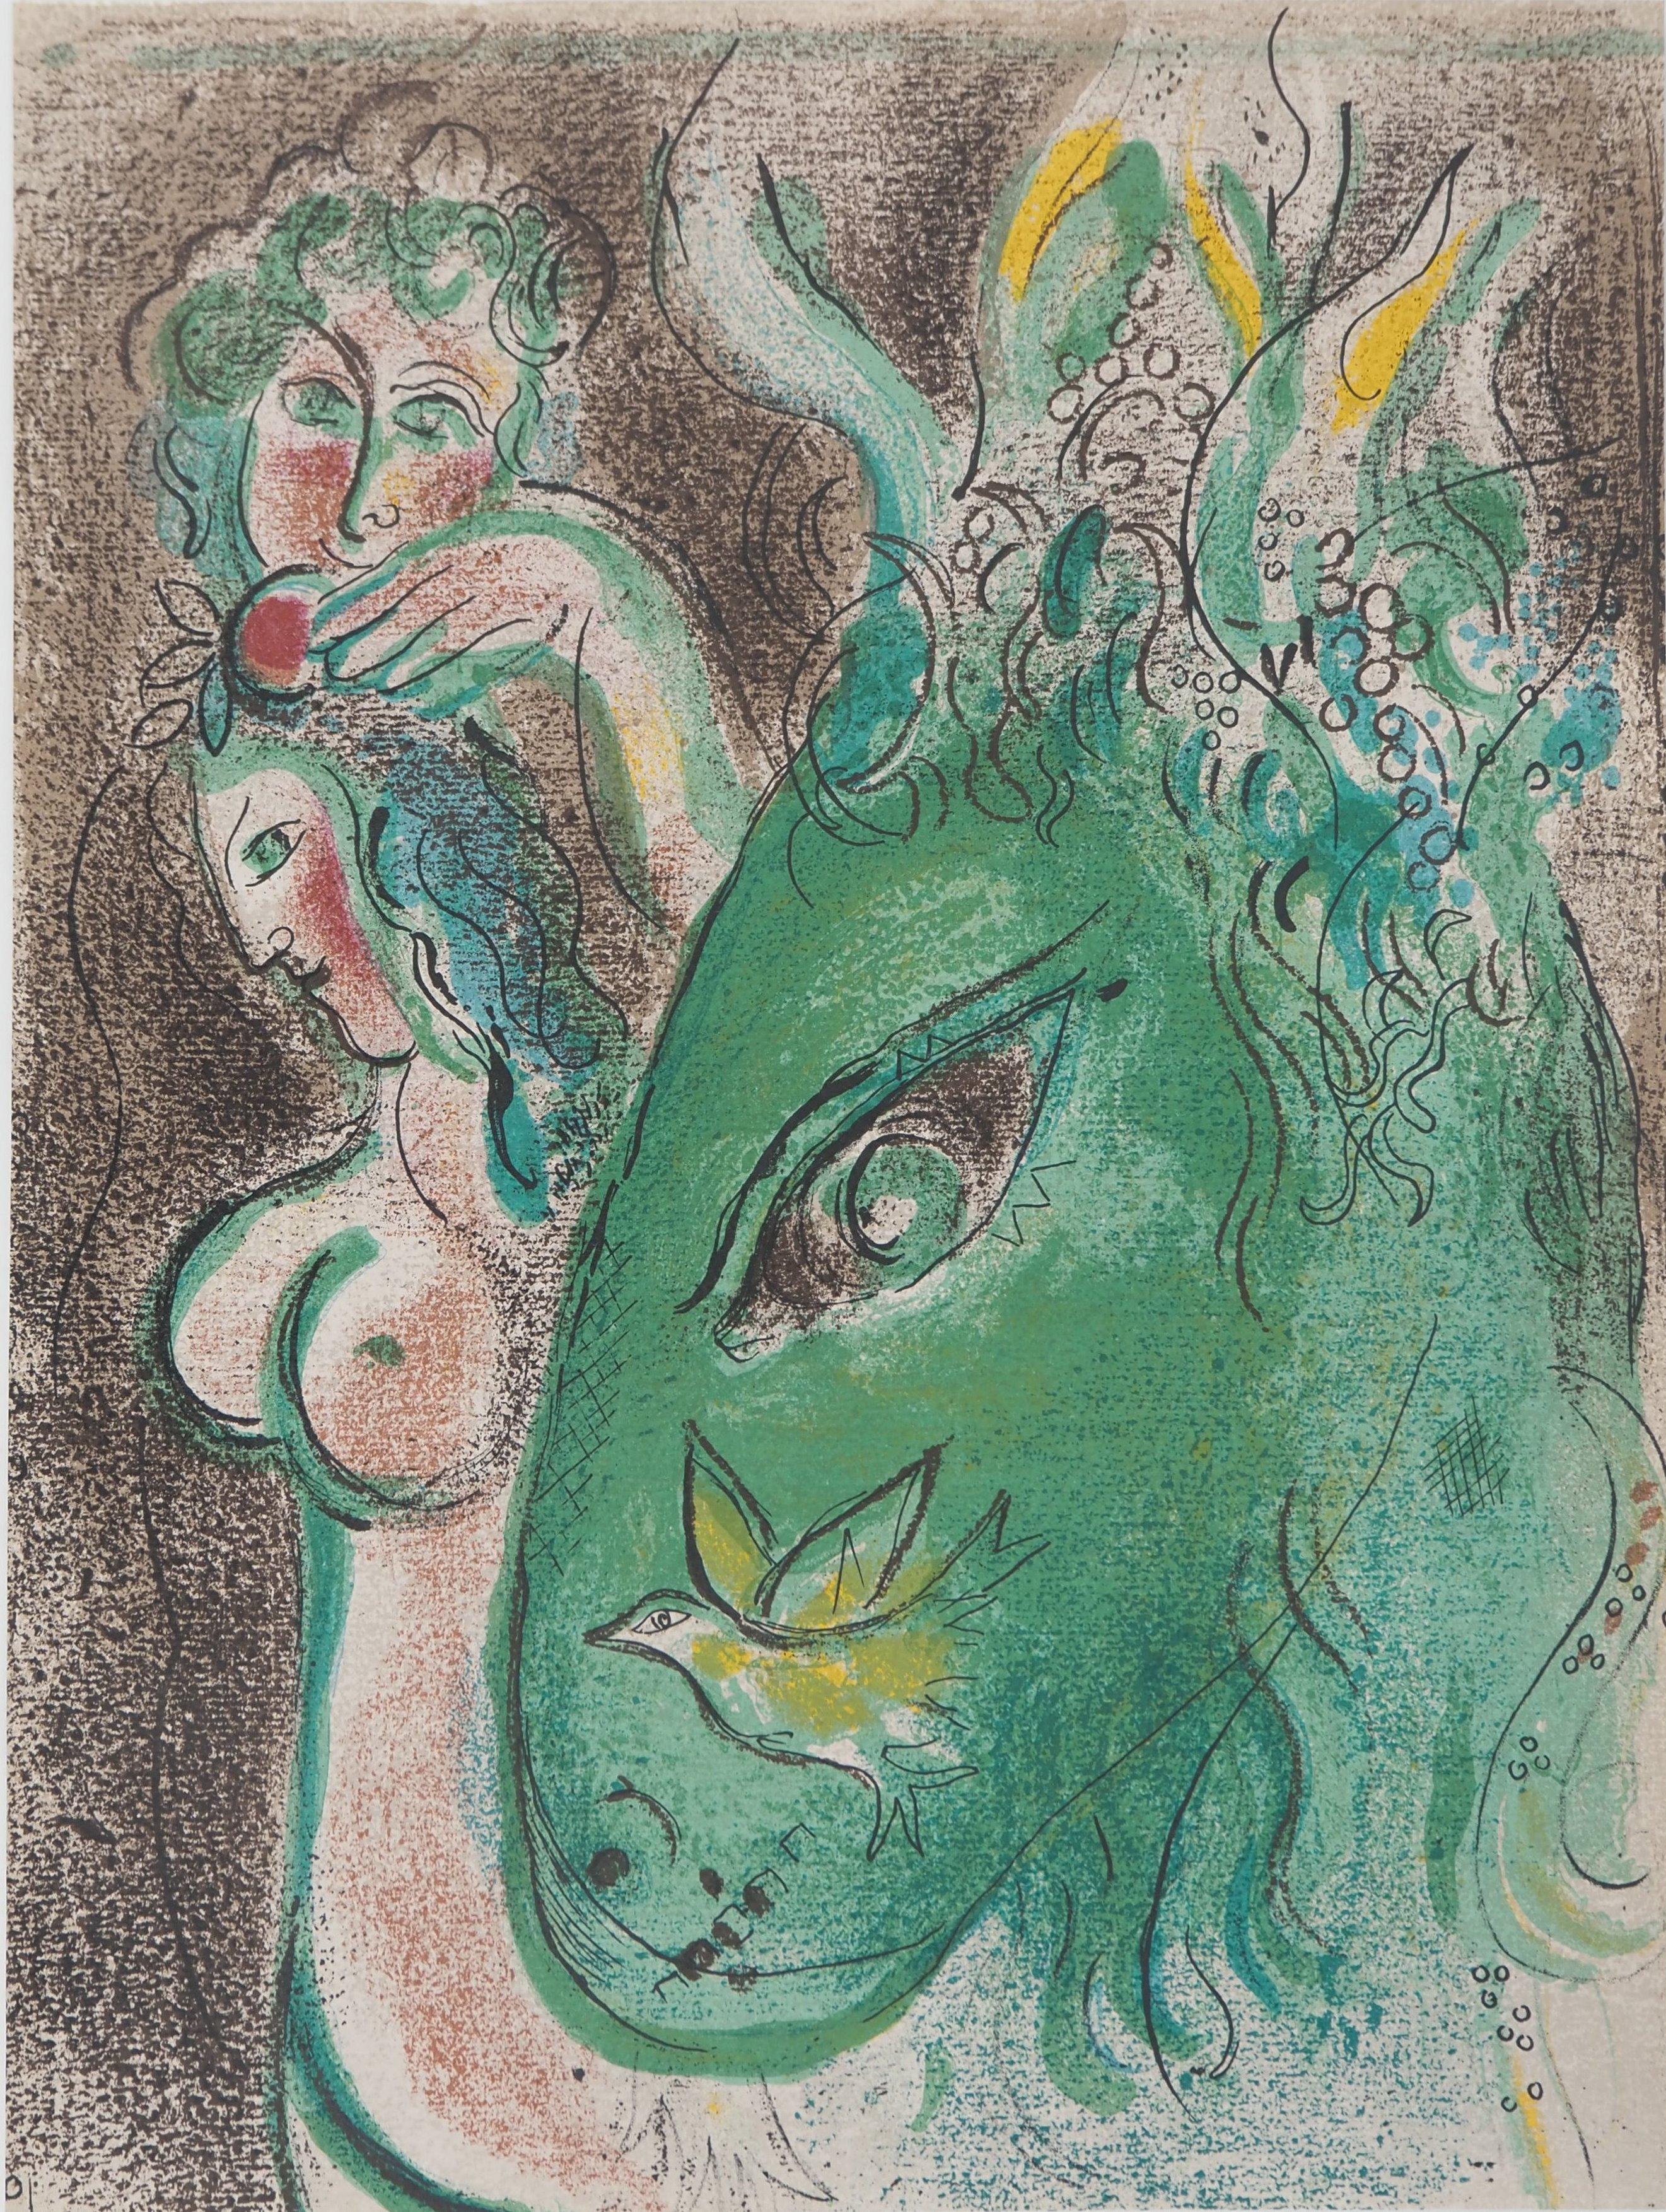 Marc Chagall Figurative Print - The Bible : Adam and Eve in Paradise - Original Lithograph (Mourlot #233)